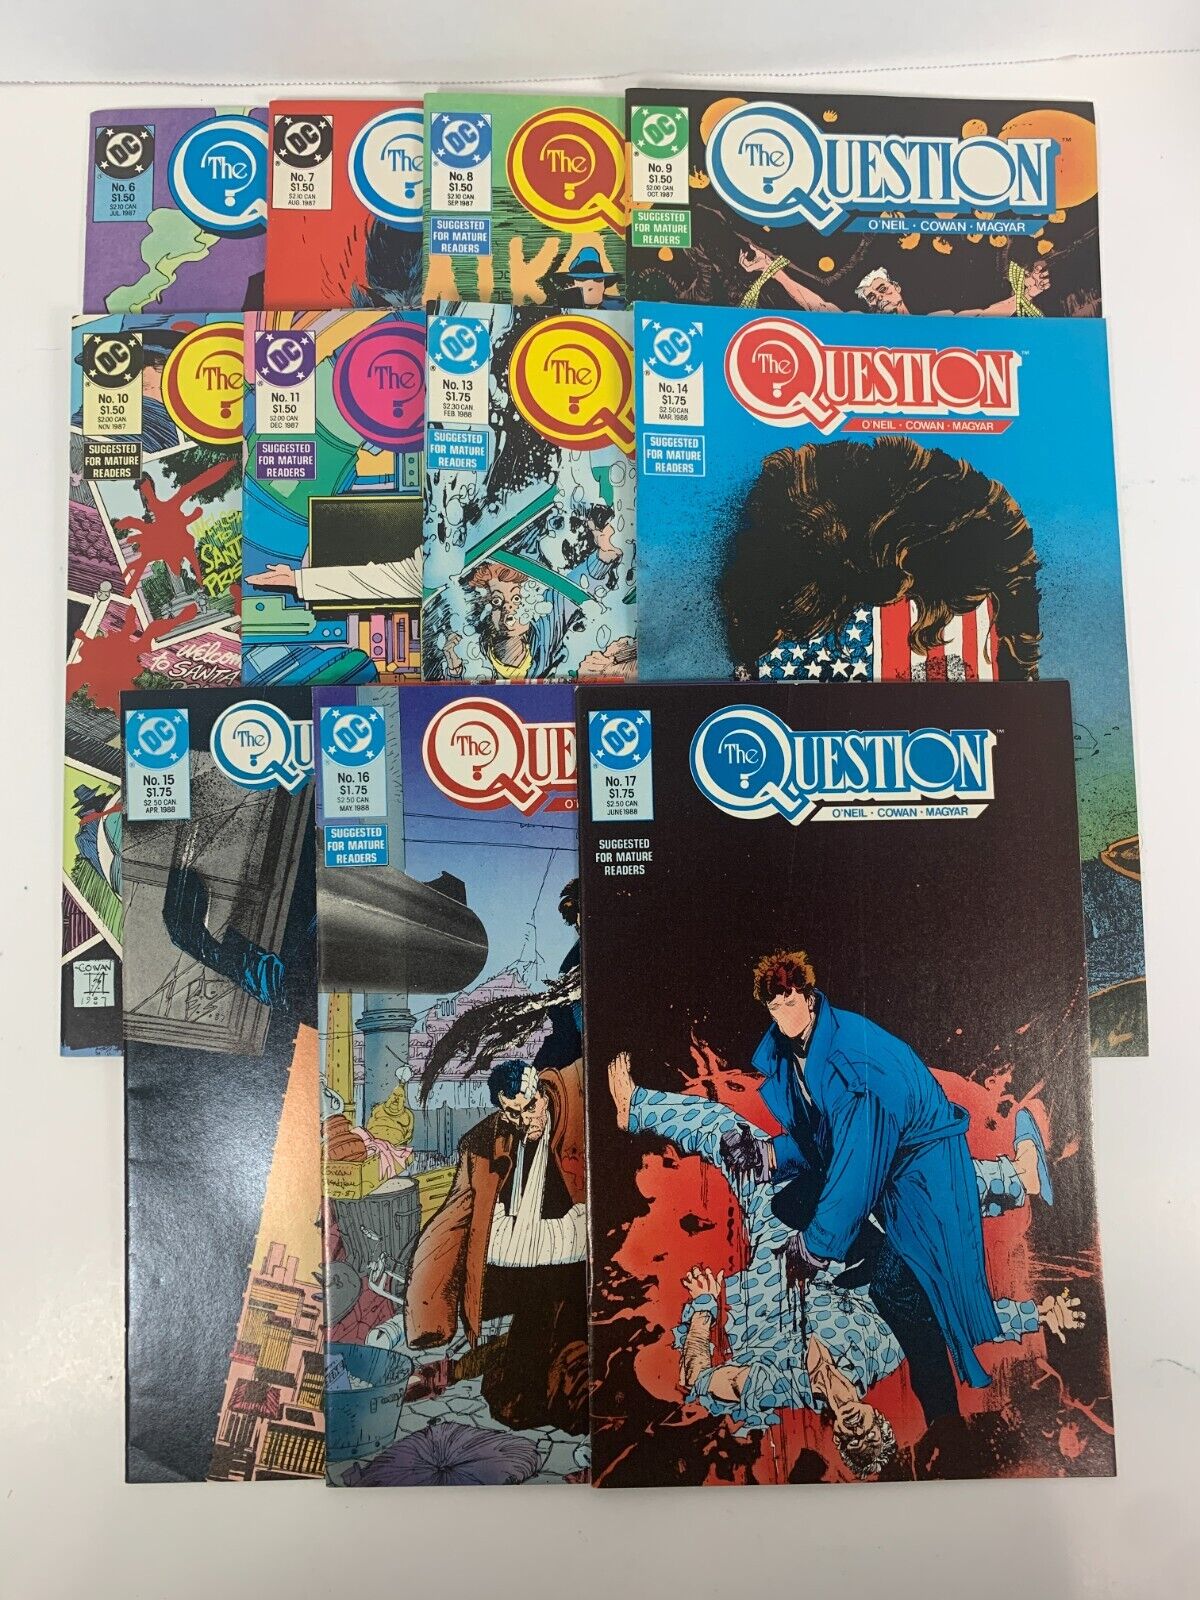 The Question DC Comic Book Lot - 17 16 15 14 13 11 10 9 8 7 6 - 1987 1988